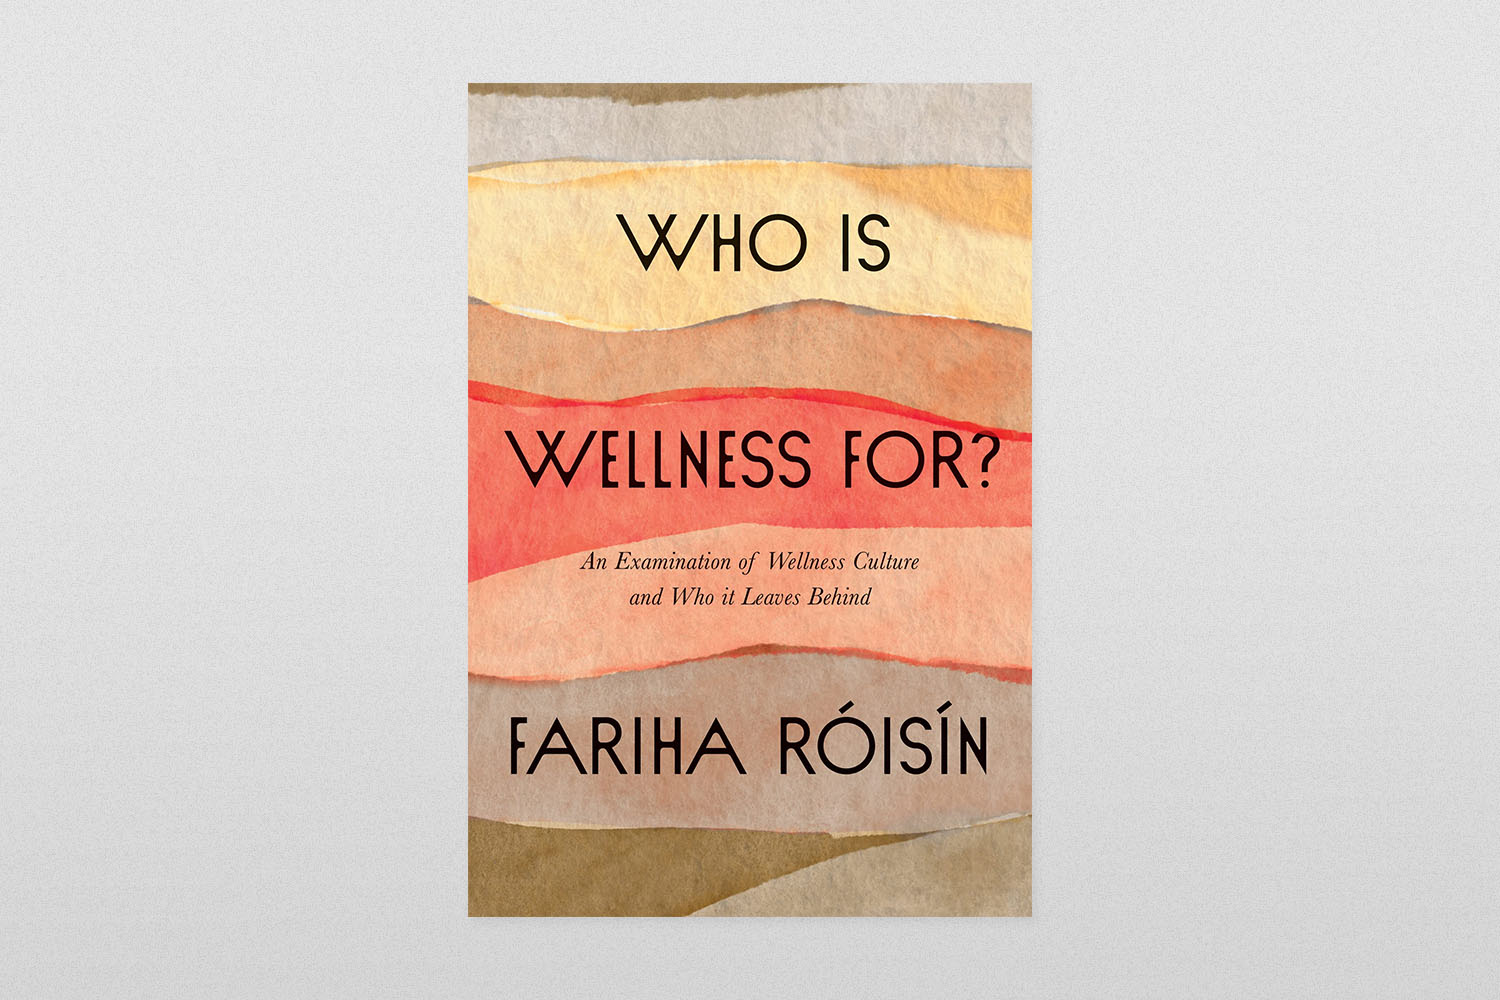 Who Is Wellness For?- An Examination of Wellness Culture and Who It Leaves Behind by Fariha Roisin